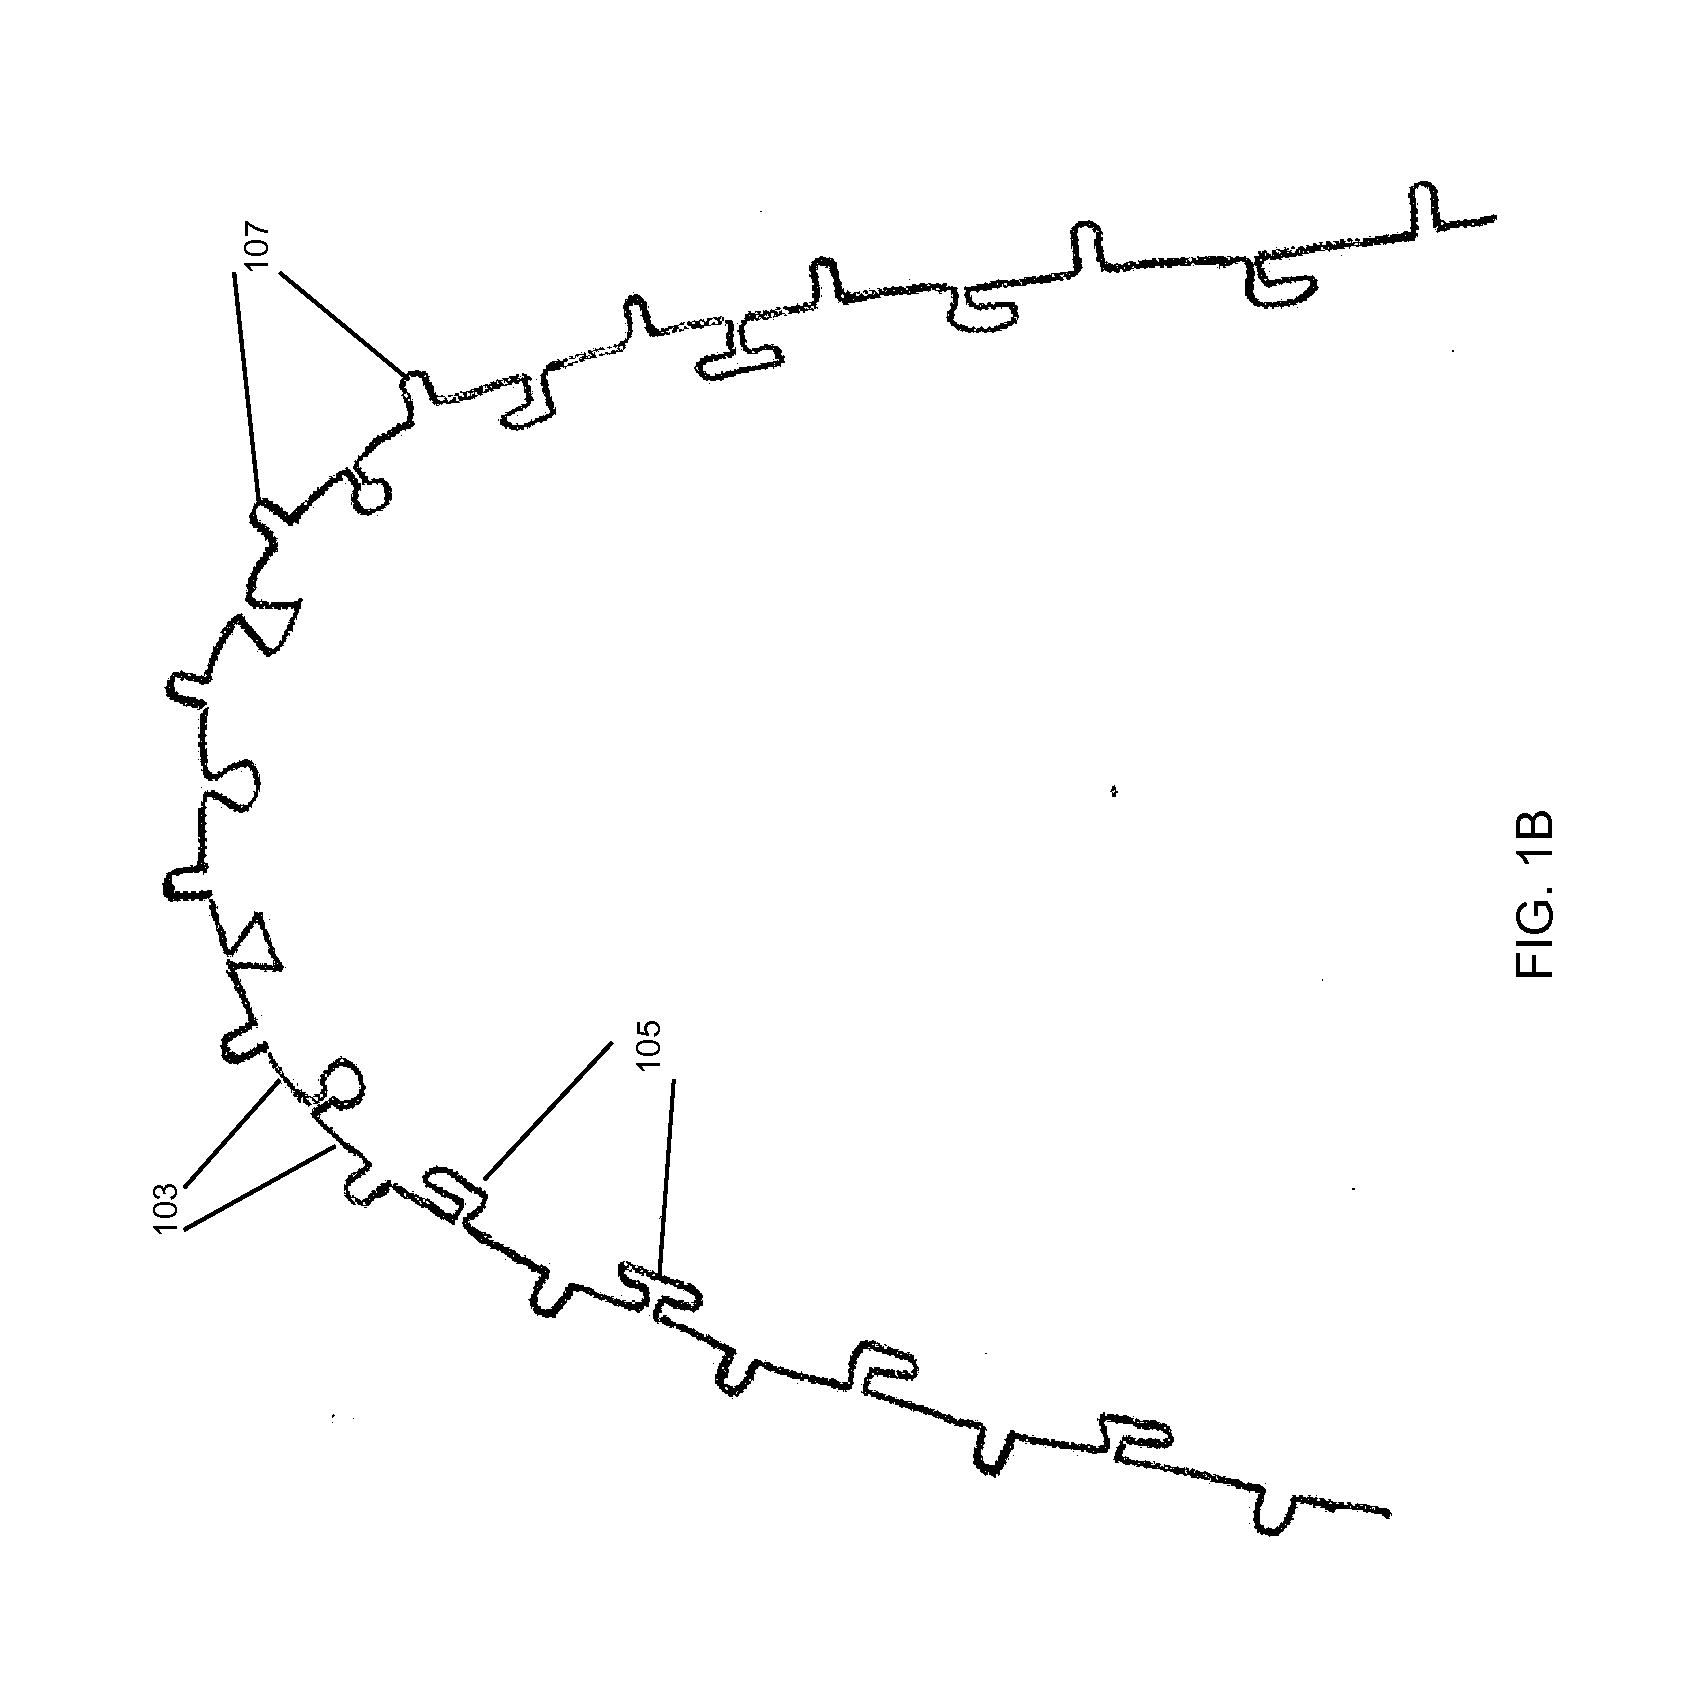 Orthodontic appliance with snap fitted, non-sliding archwire